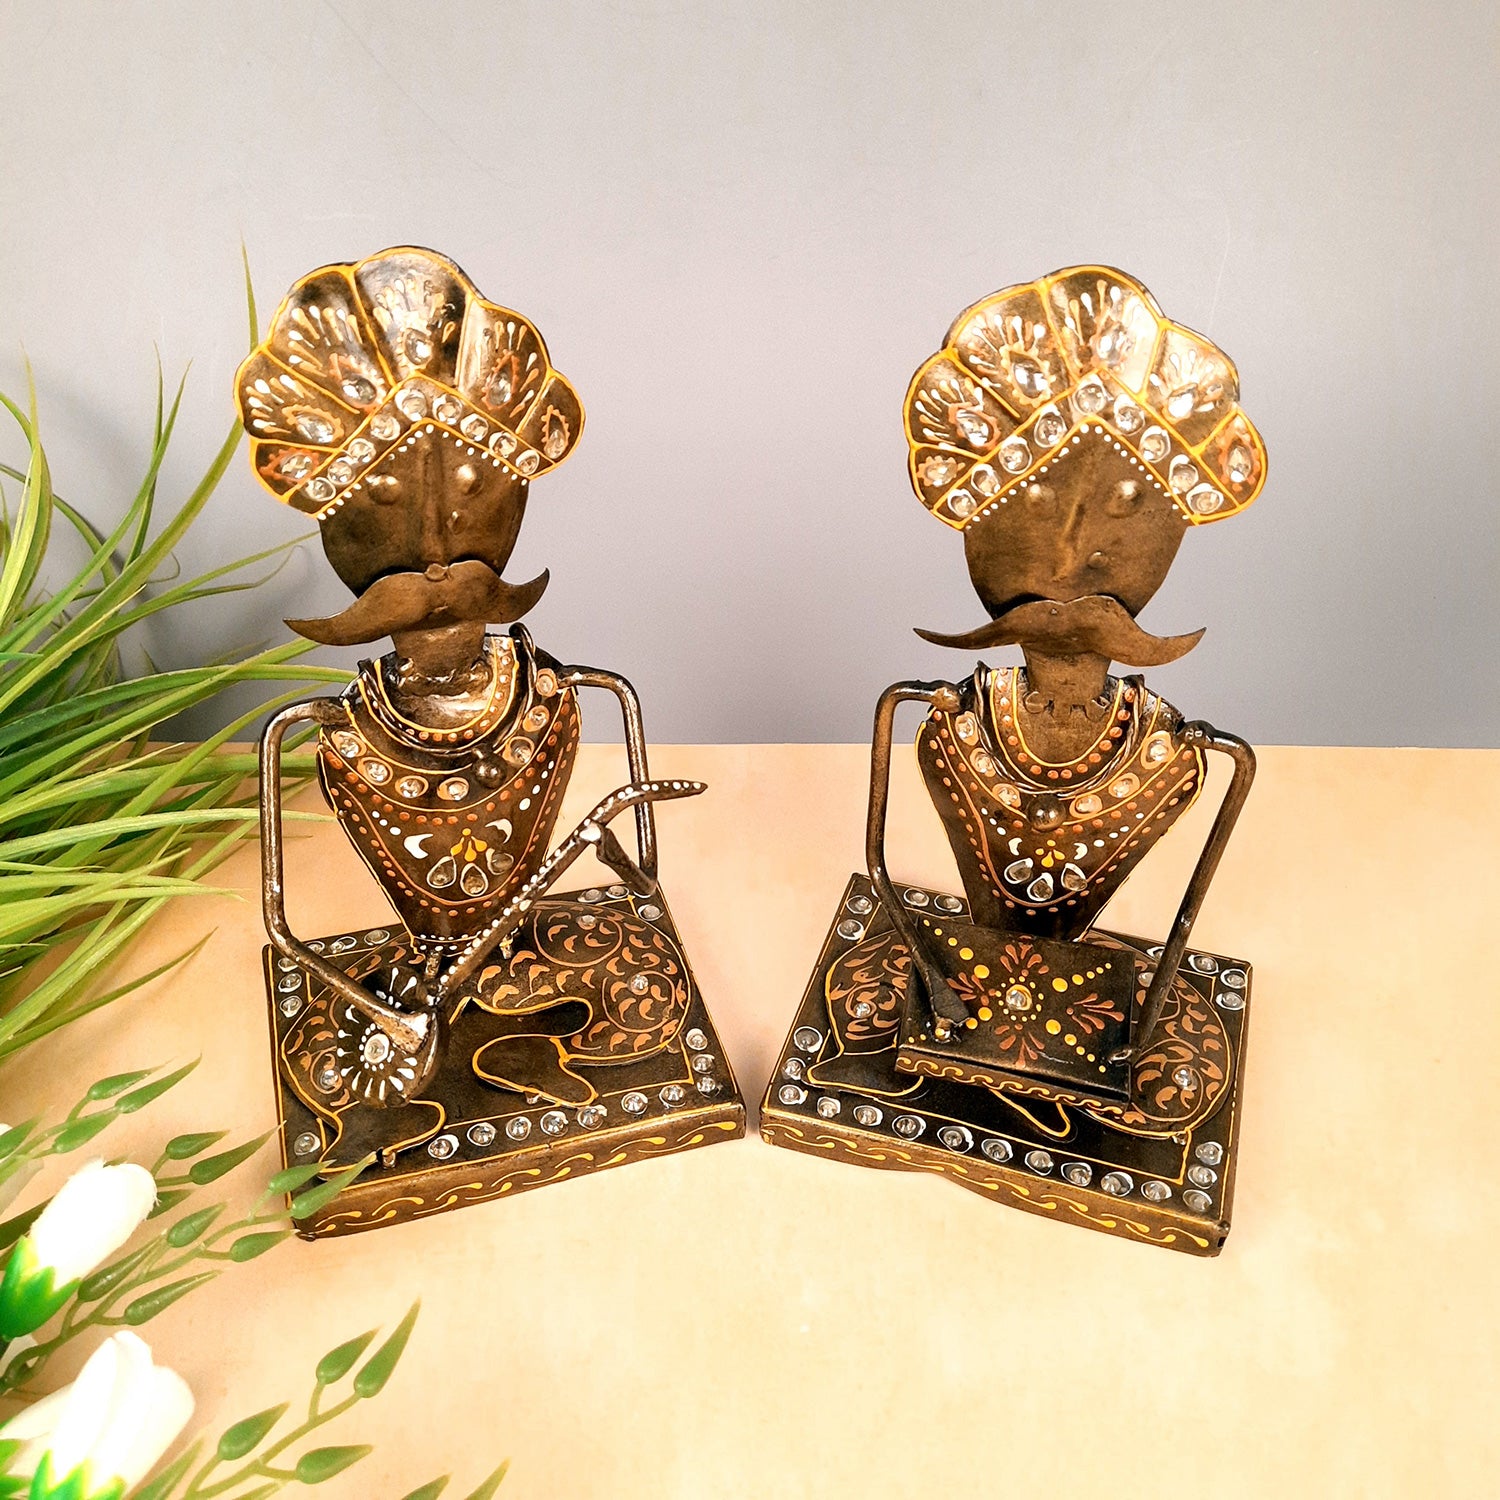 Musician Showpiece Playing Musical Instruments | Decorative Showpieces for Home, Bedroom, Living Room, Office Desk & Table | Gifts For Wedding, Housewarming & Festivals - 9 Inch (Set of 2) - Apkamart #Style_Design 2